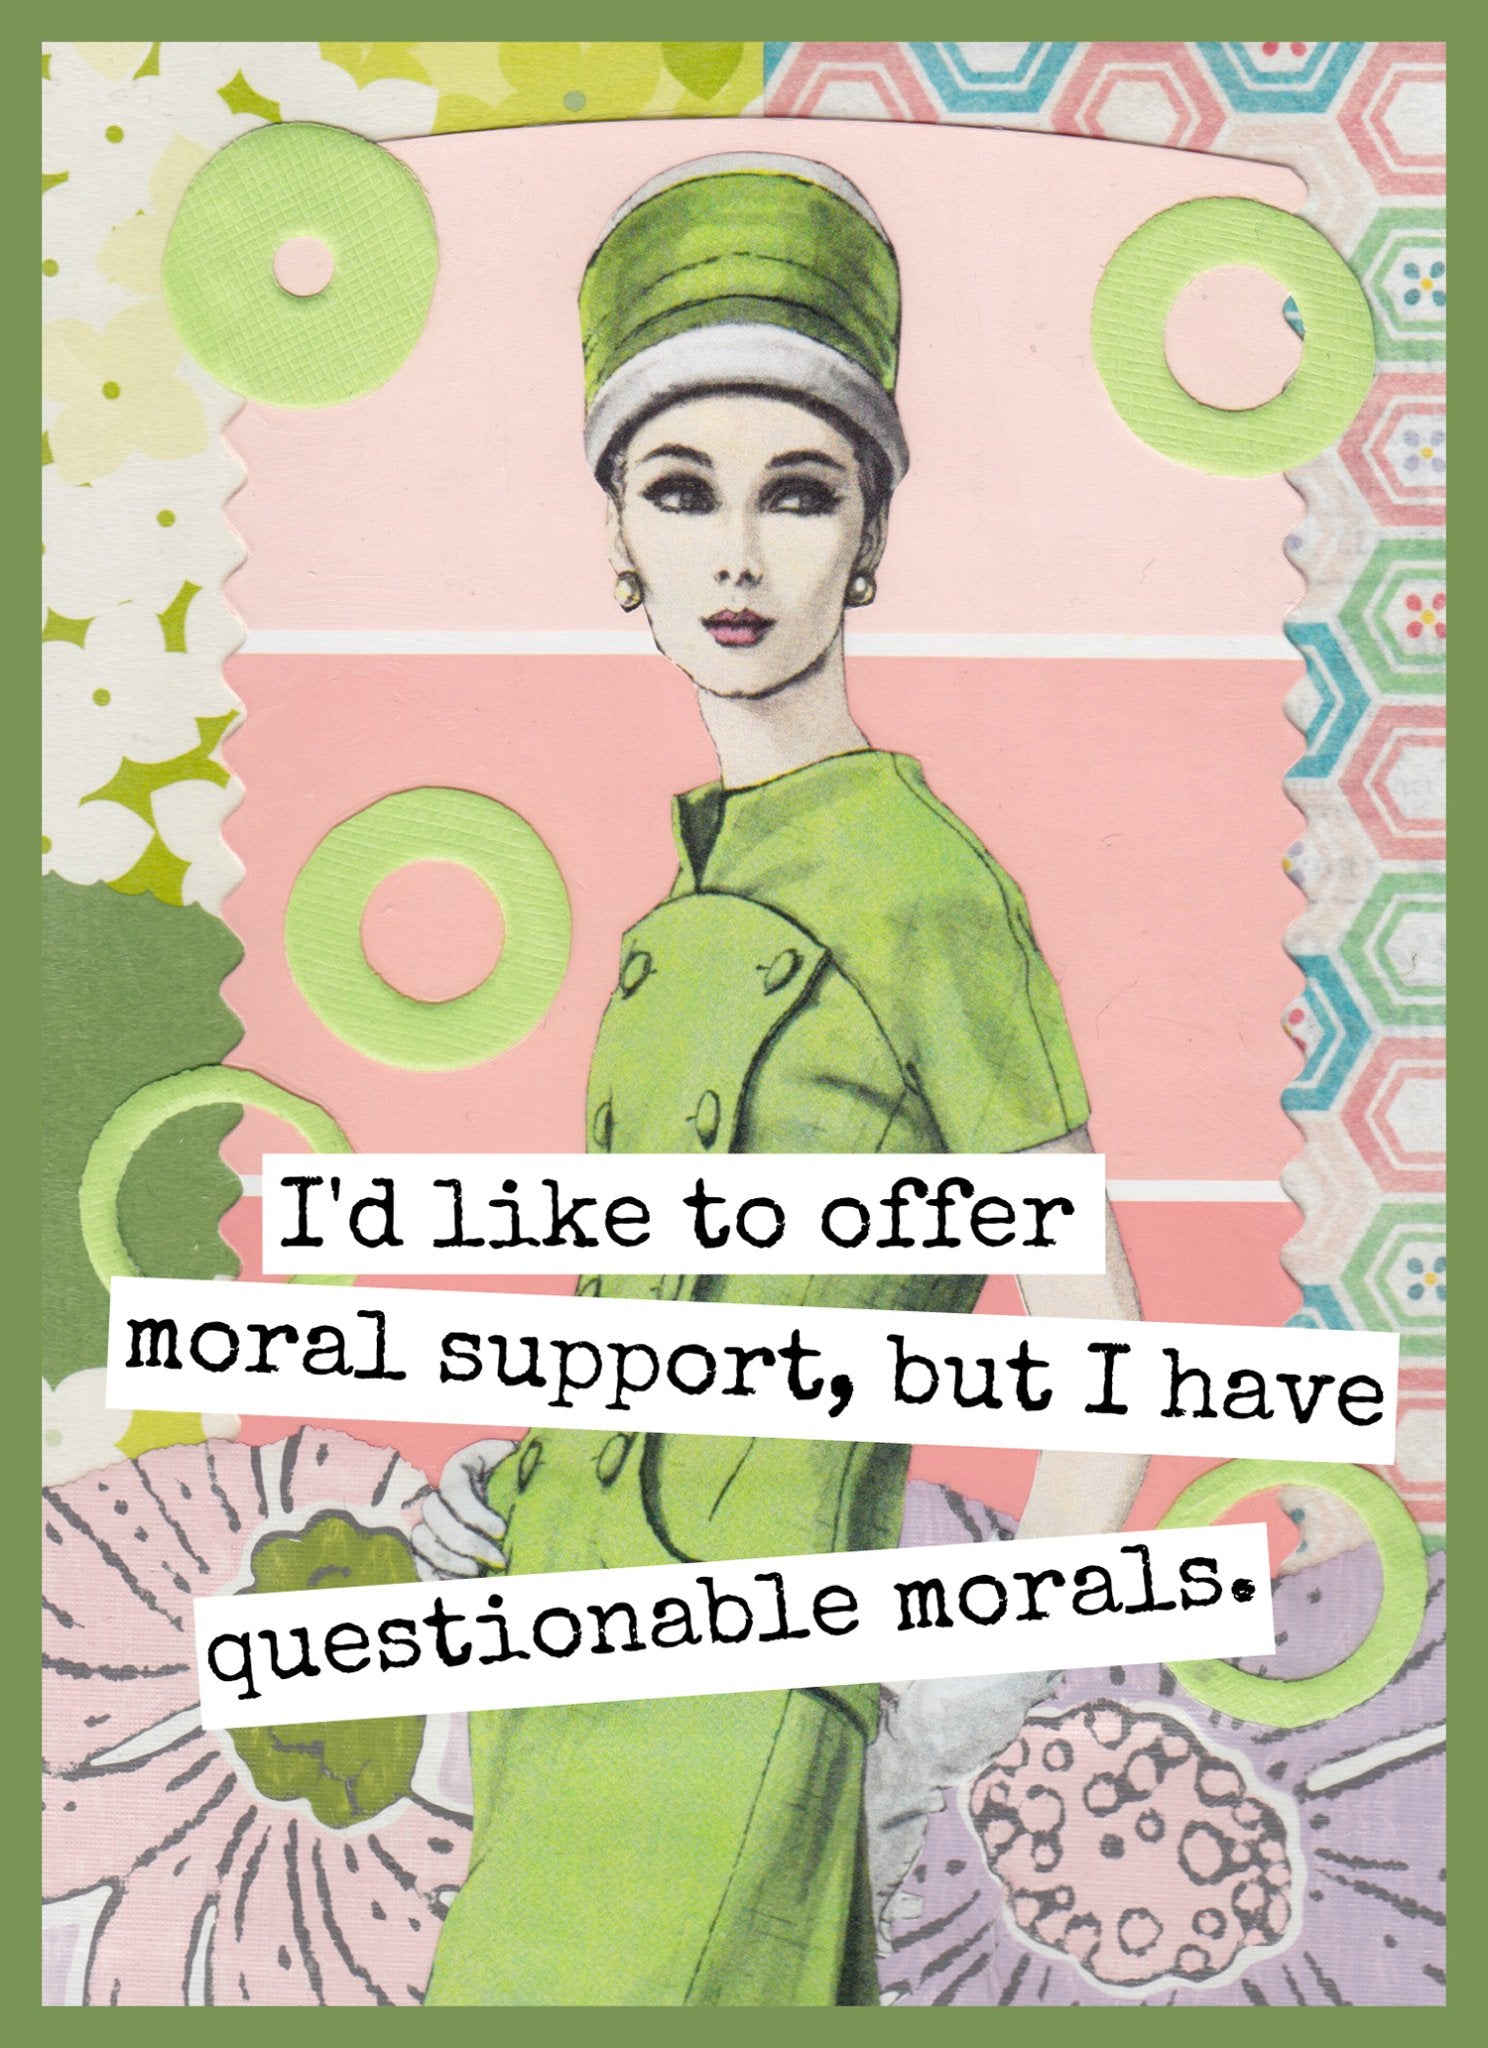 Funny Greeting Card. I Like To Offer Moral Support... - My Filosophy